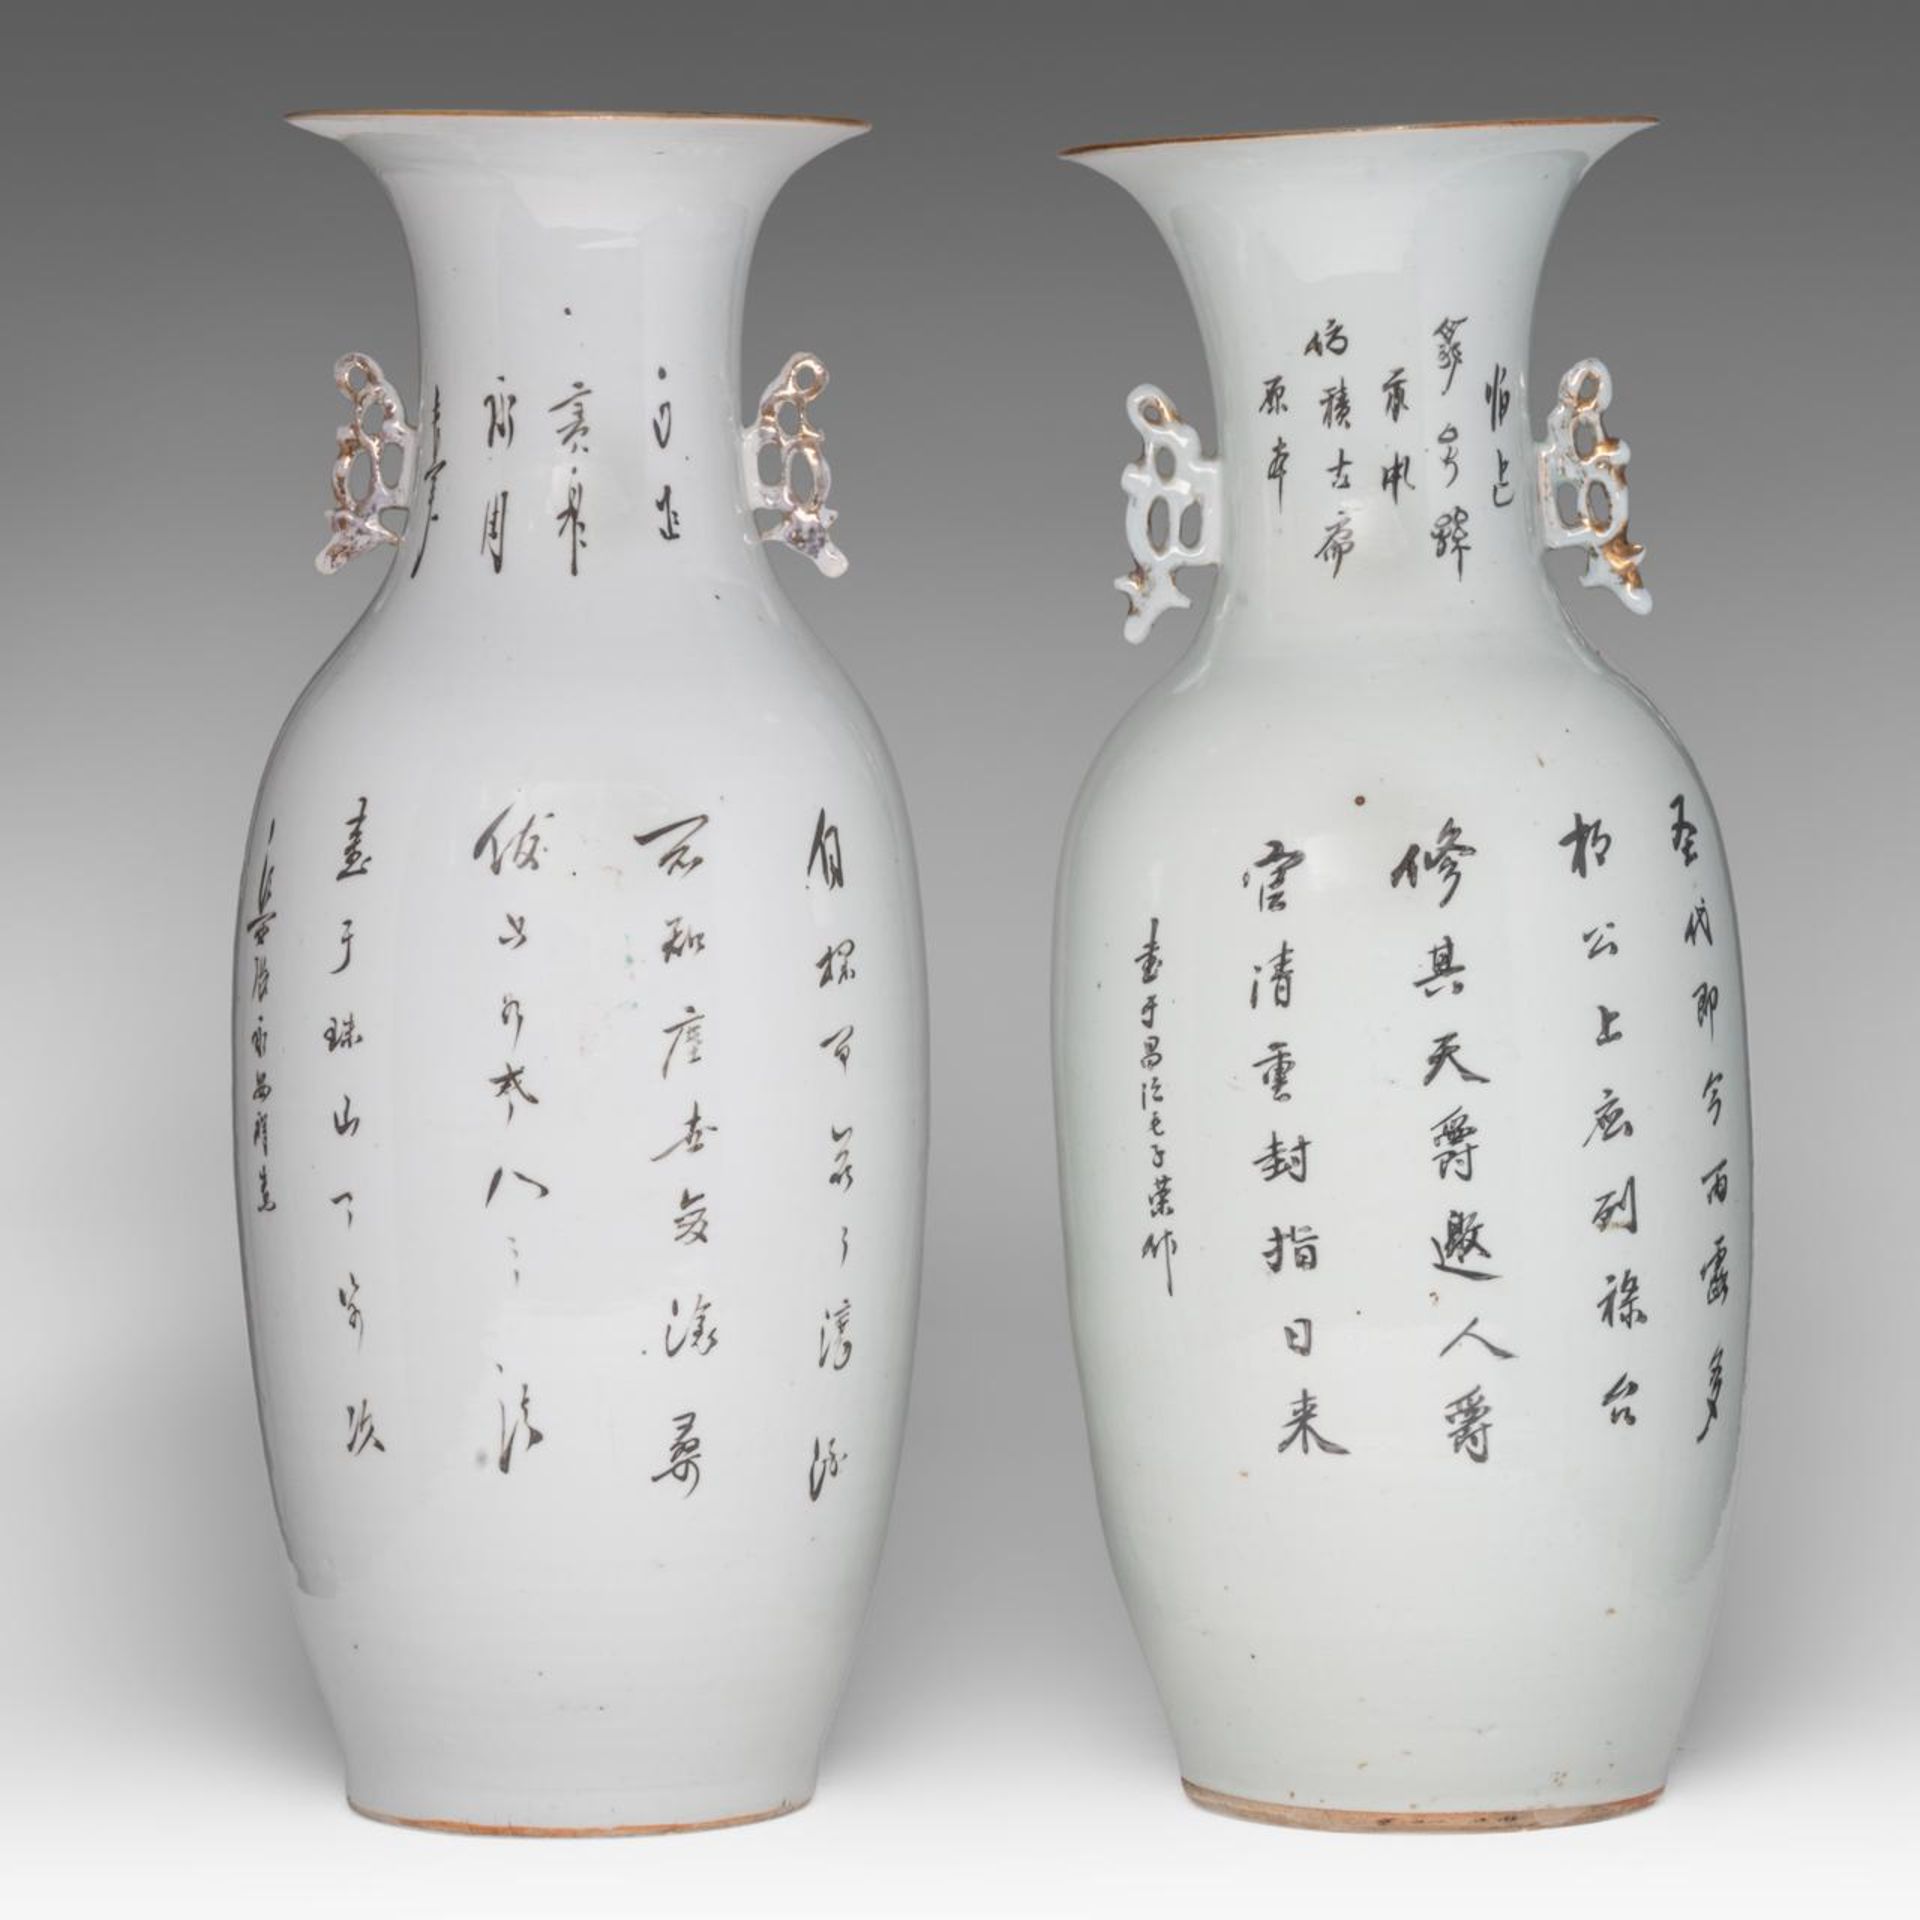 Two Chinese famille rose vases, both with a signed text, Republic period, H 58 cm - Image 3 of 6